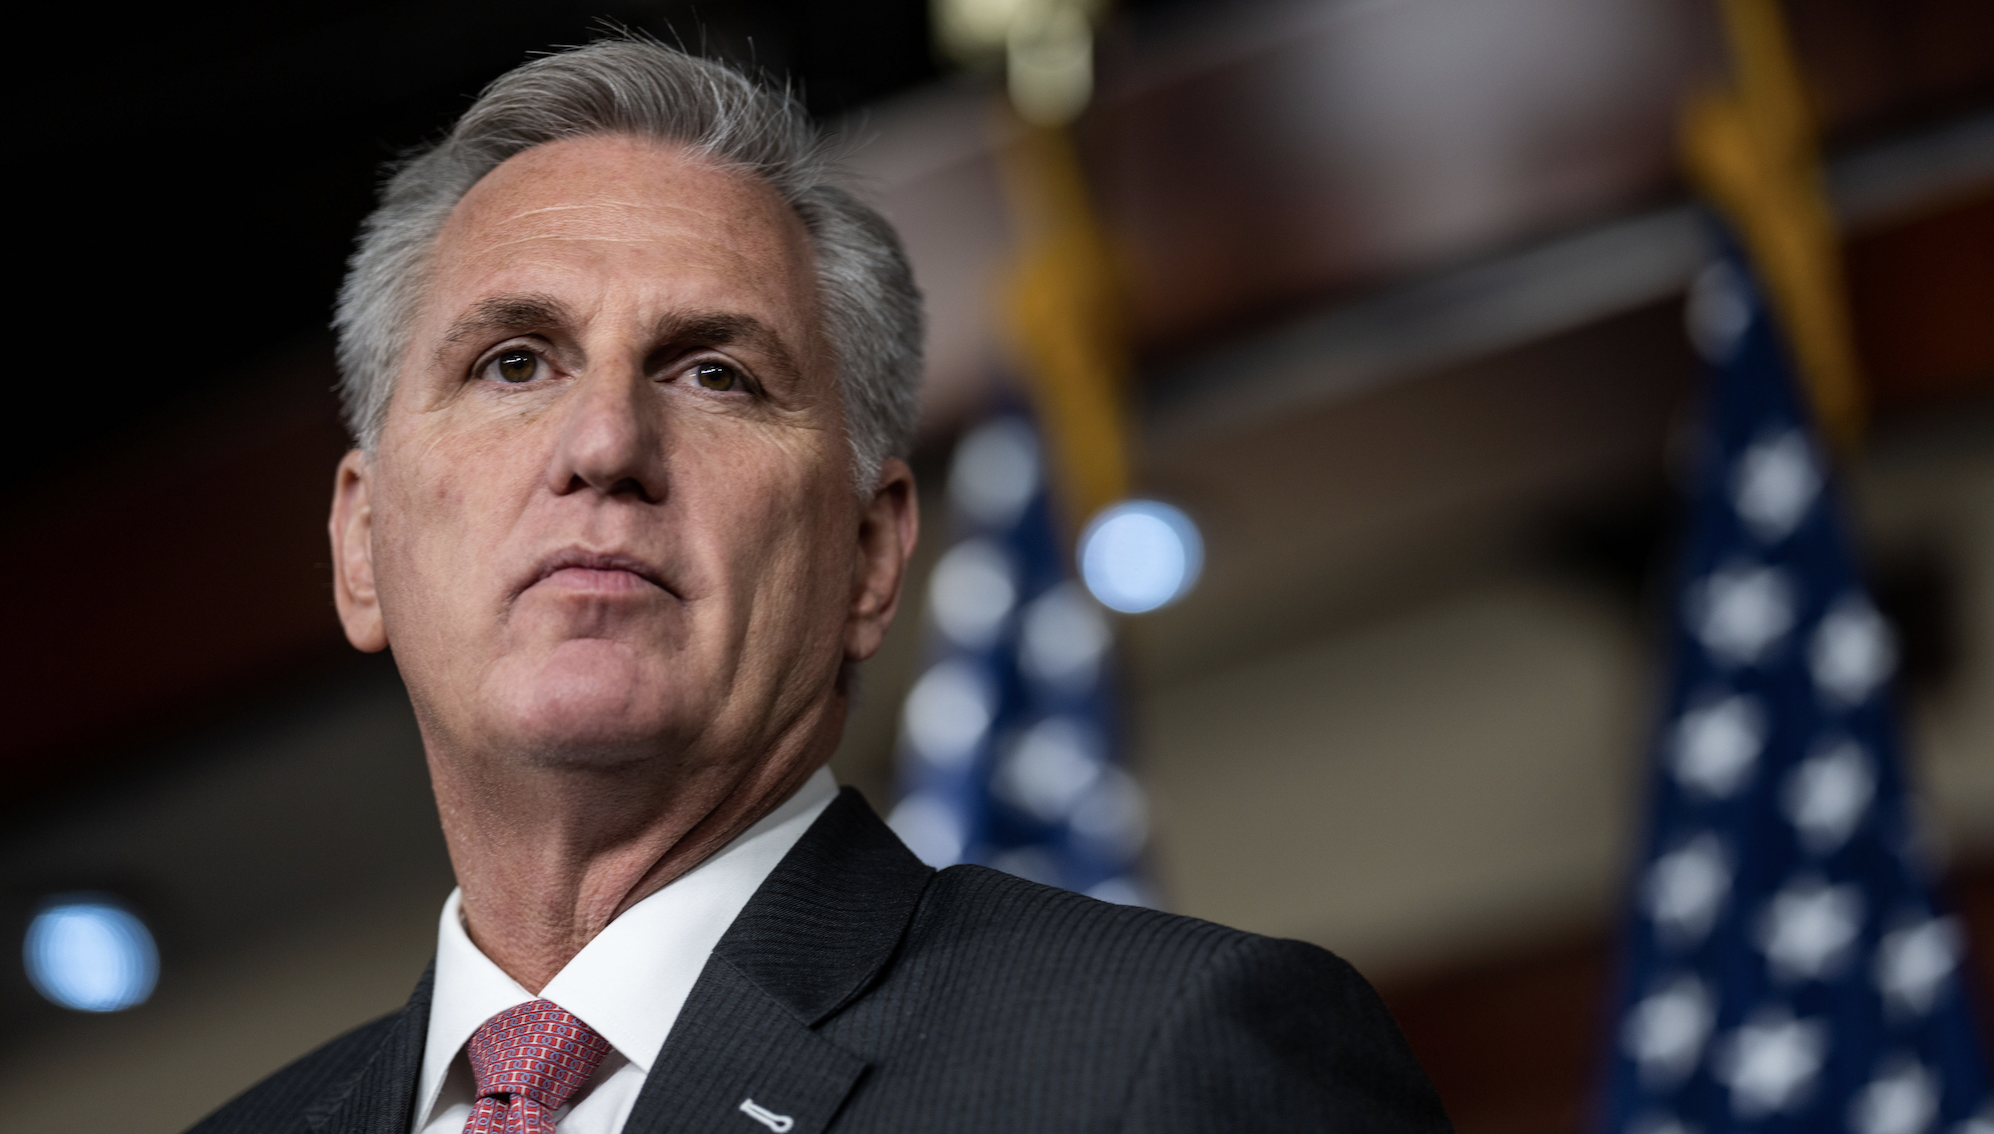 Seven House Republicans List Demands For Next Speaker As McCarthy Battles For Every Vote